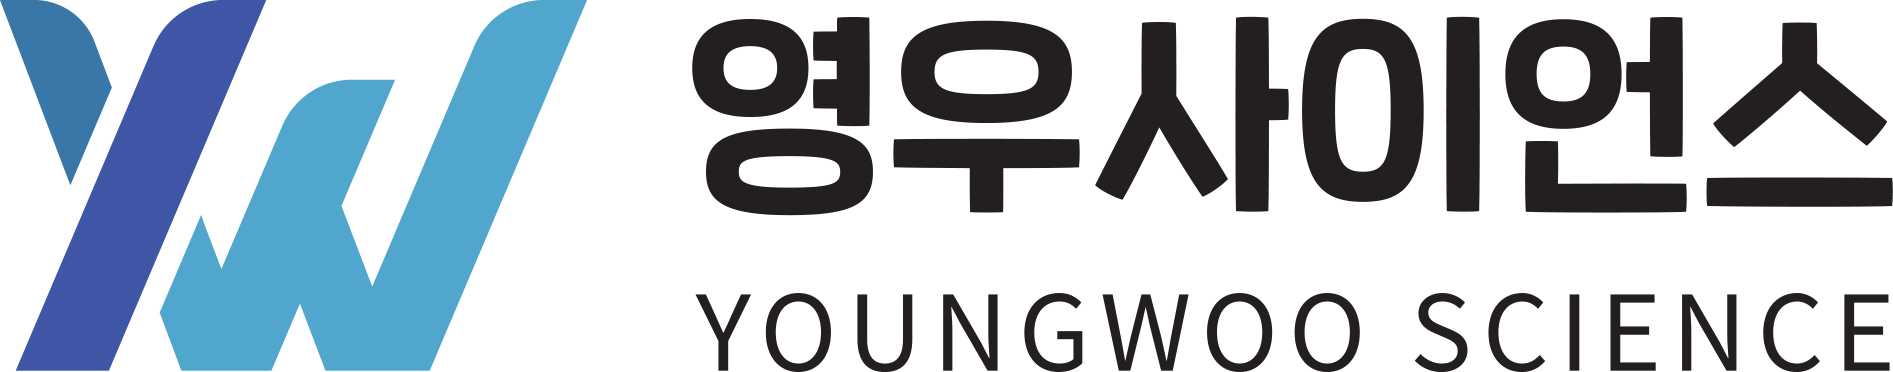 Youngwooscience-Logo-file-2